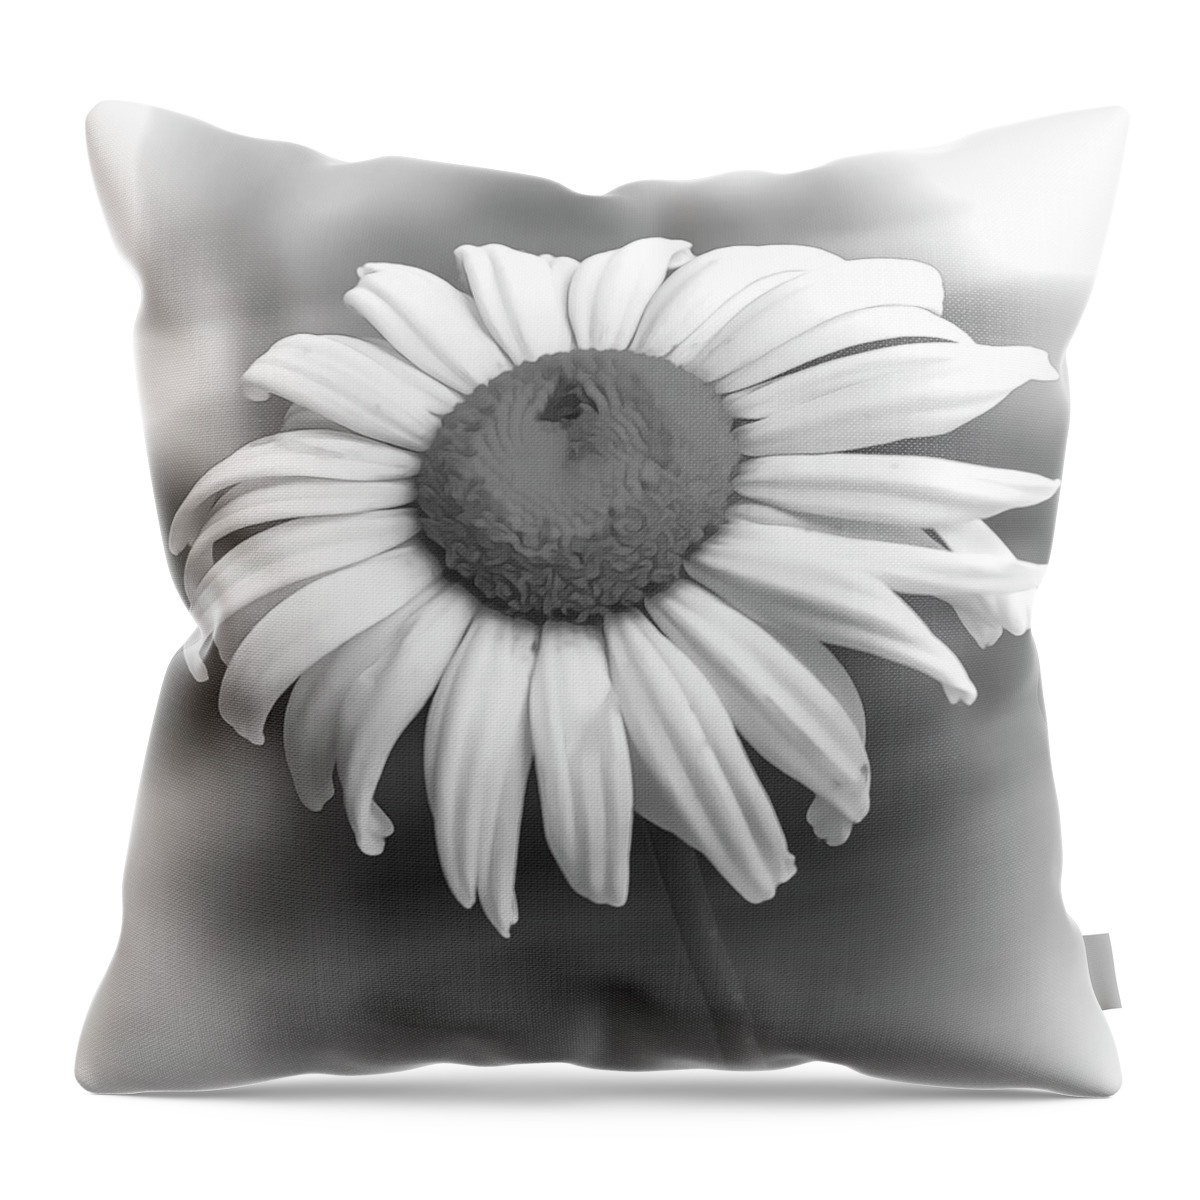 Monochrome Throw Pillow featuring the photograph Sweet Daisy by Cathy Kovarik